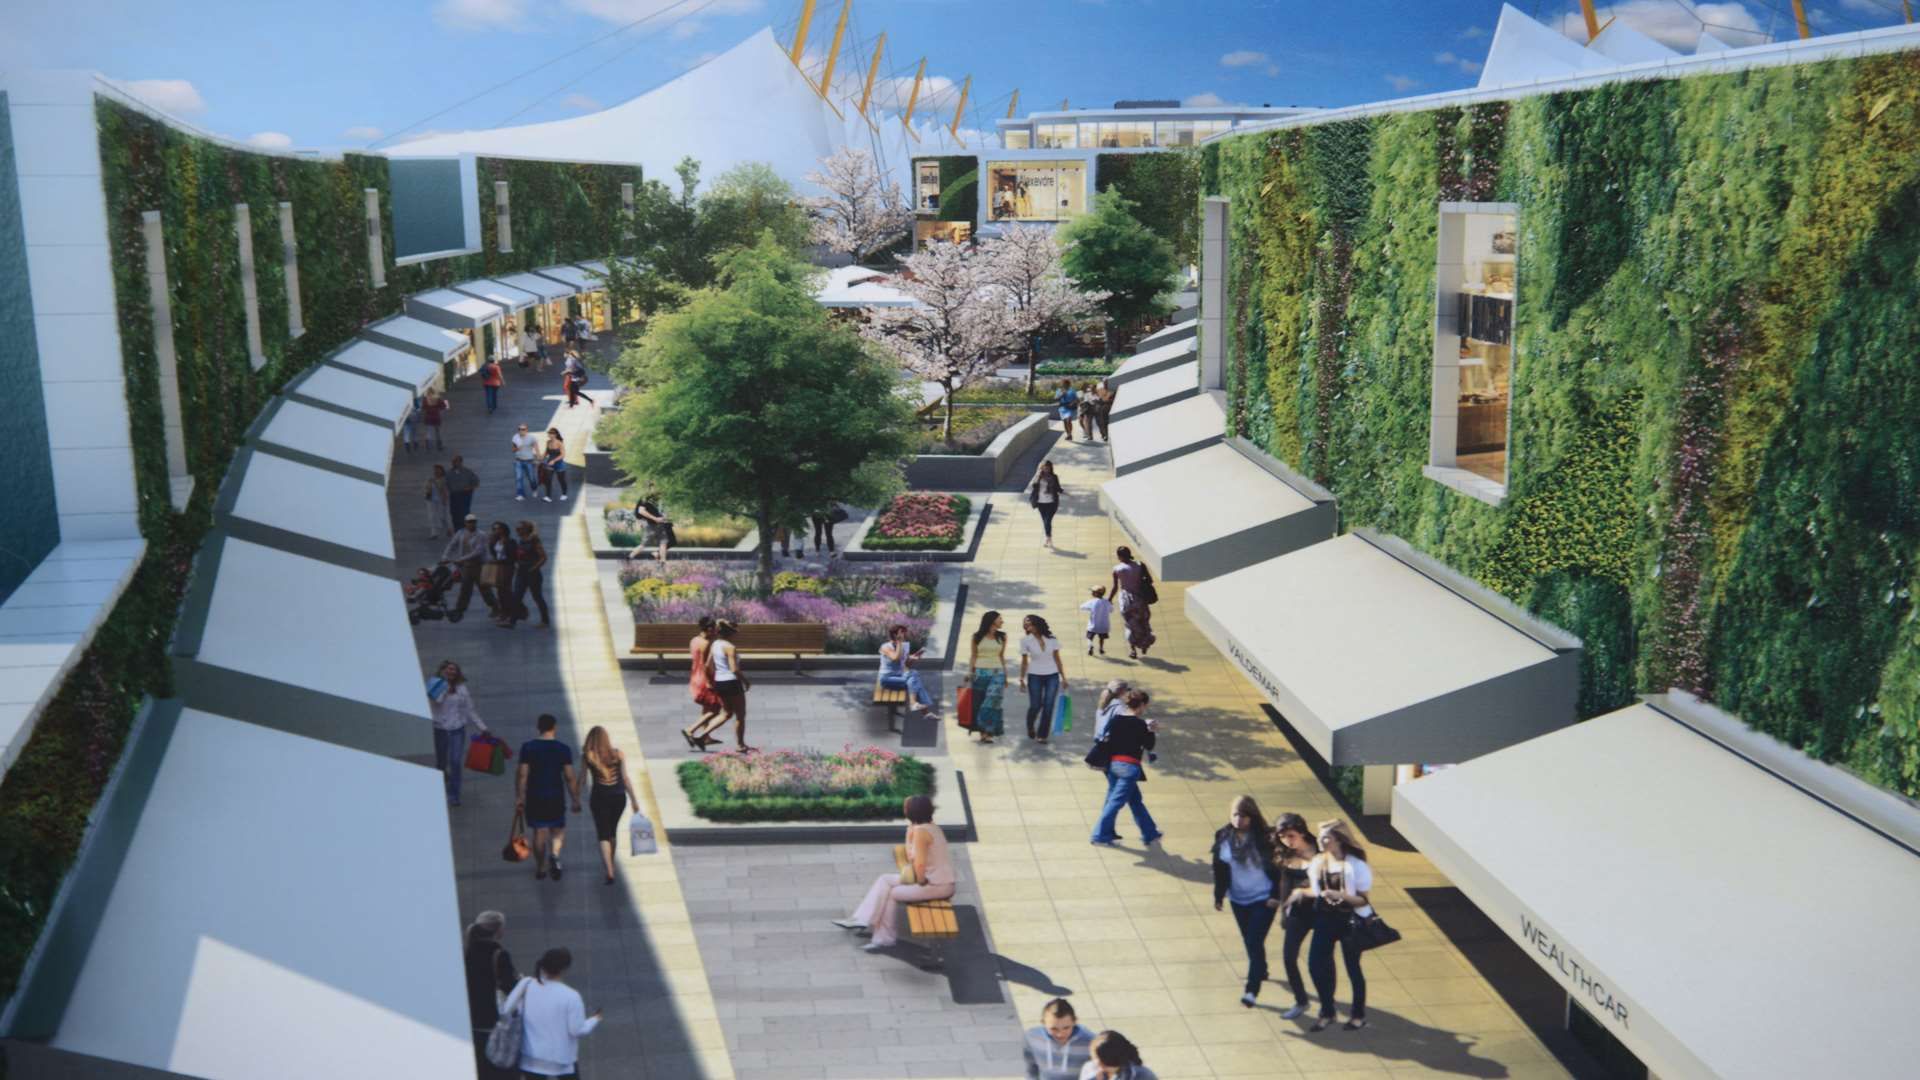 An artist's impression how an expanded Ashford Designer Outlet will look